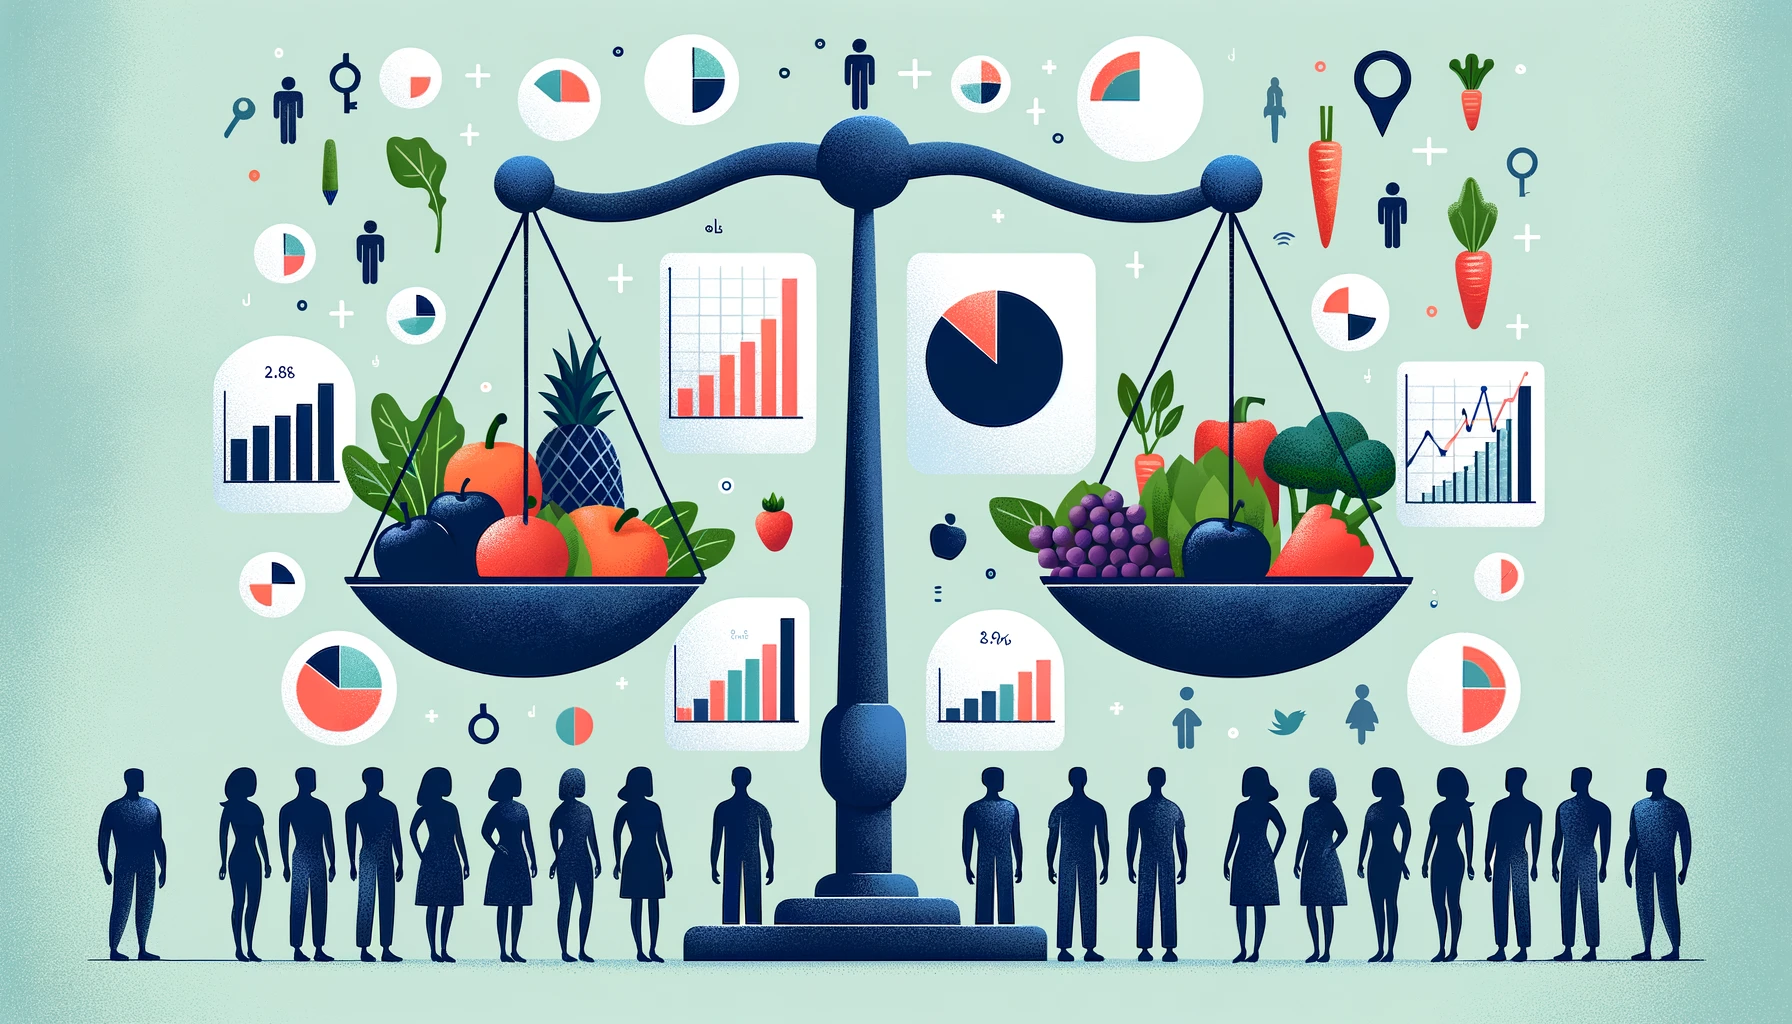 A conceptual illustration of a scale balancing fresh produce and data charts, surrounded by diverse silhouettes.